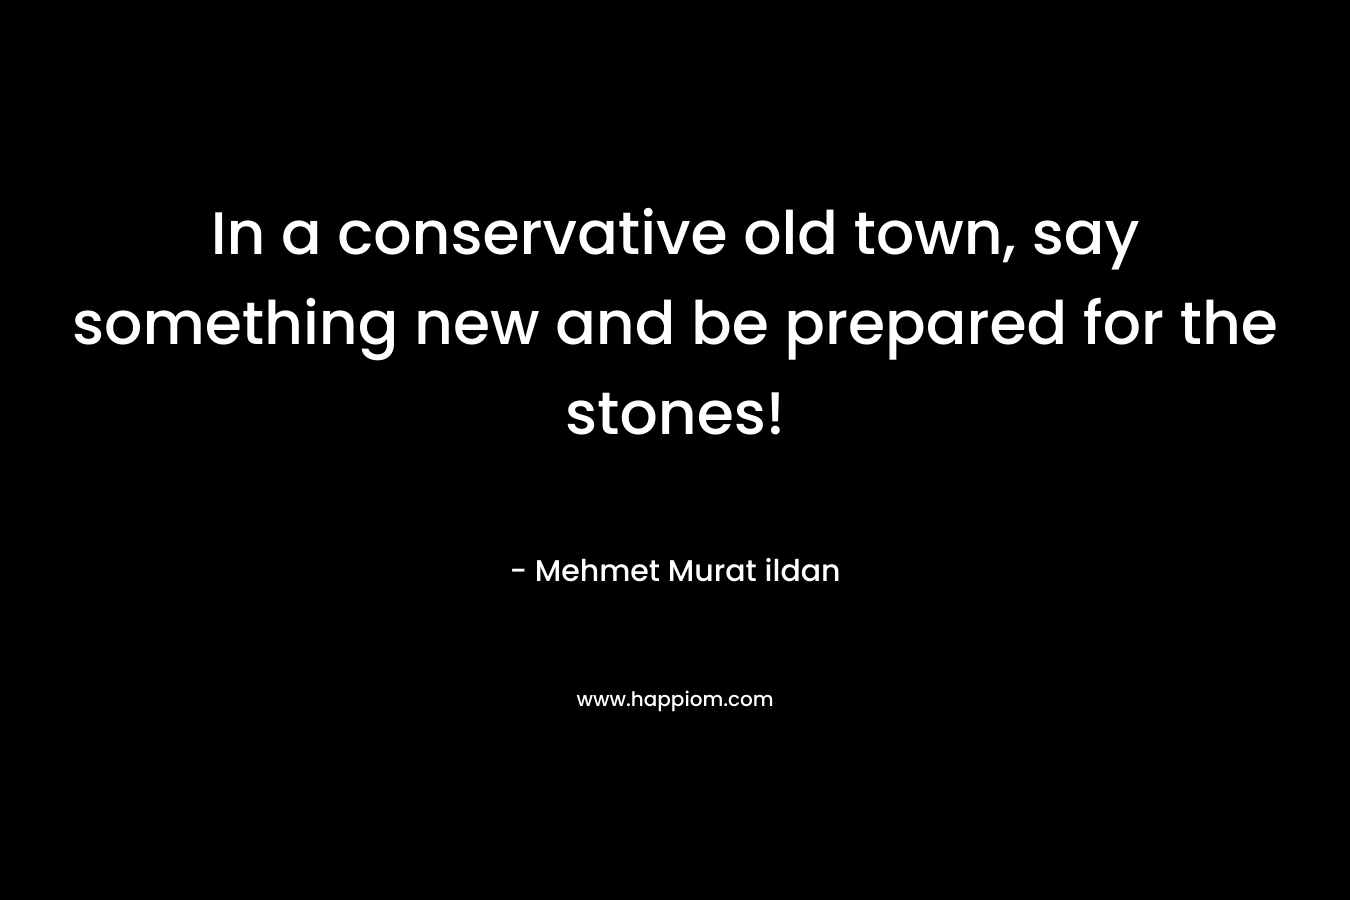 In a conservative old town, say something new and be prepared for the stones! – Mehmet Murat ildan